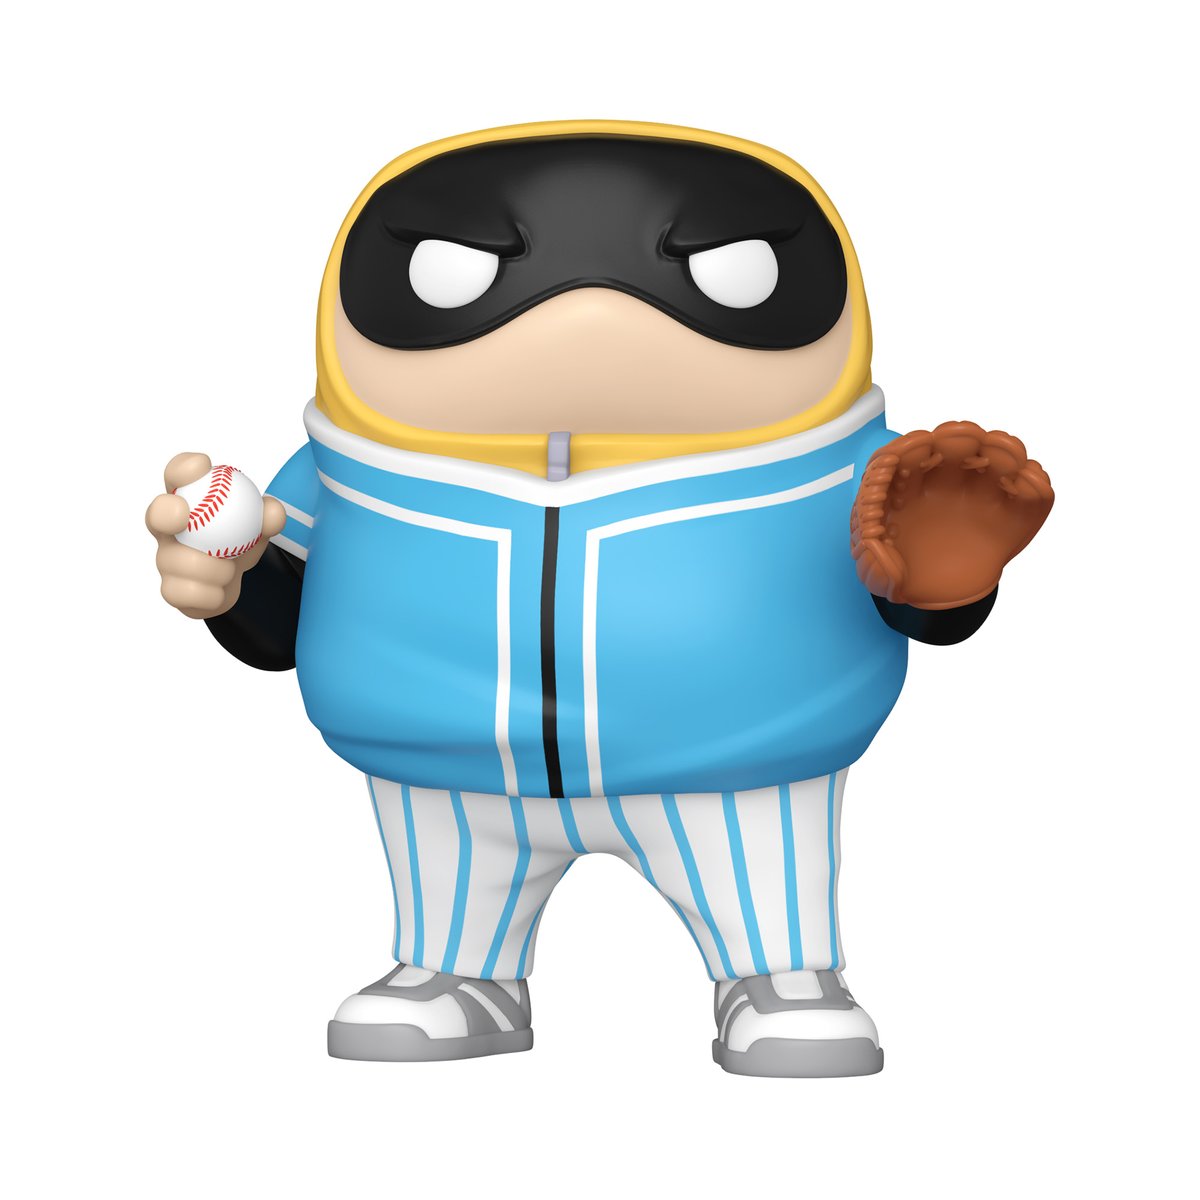 ⚾ Try out your luck with our #MyHeroAcademia giveaway! 

RT + Follow @FunkoEurope for the chance to win our Fatgum Super-sized Pop!